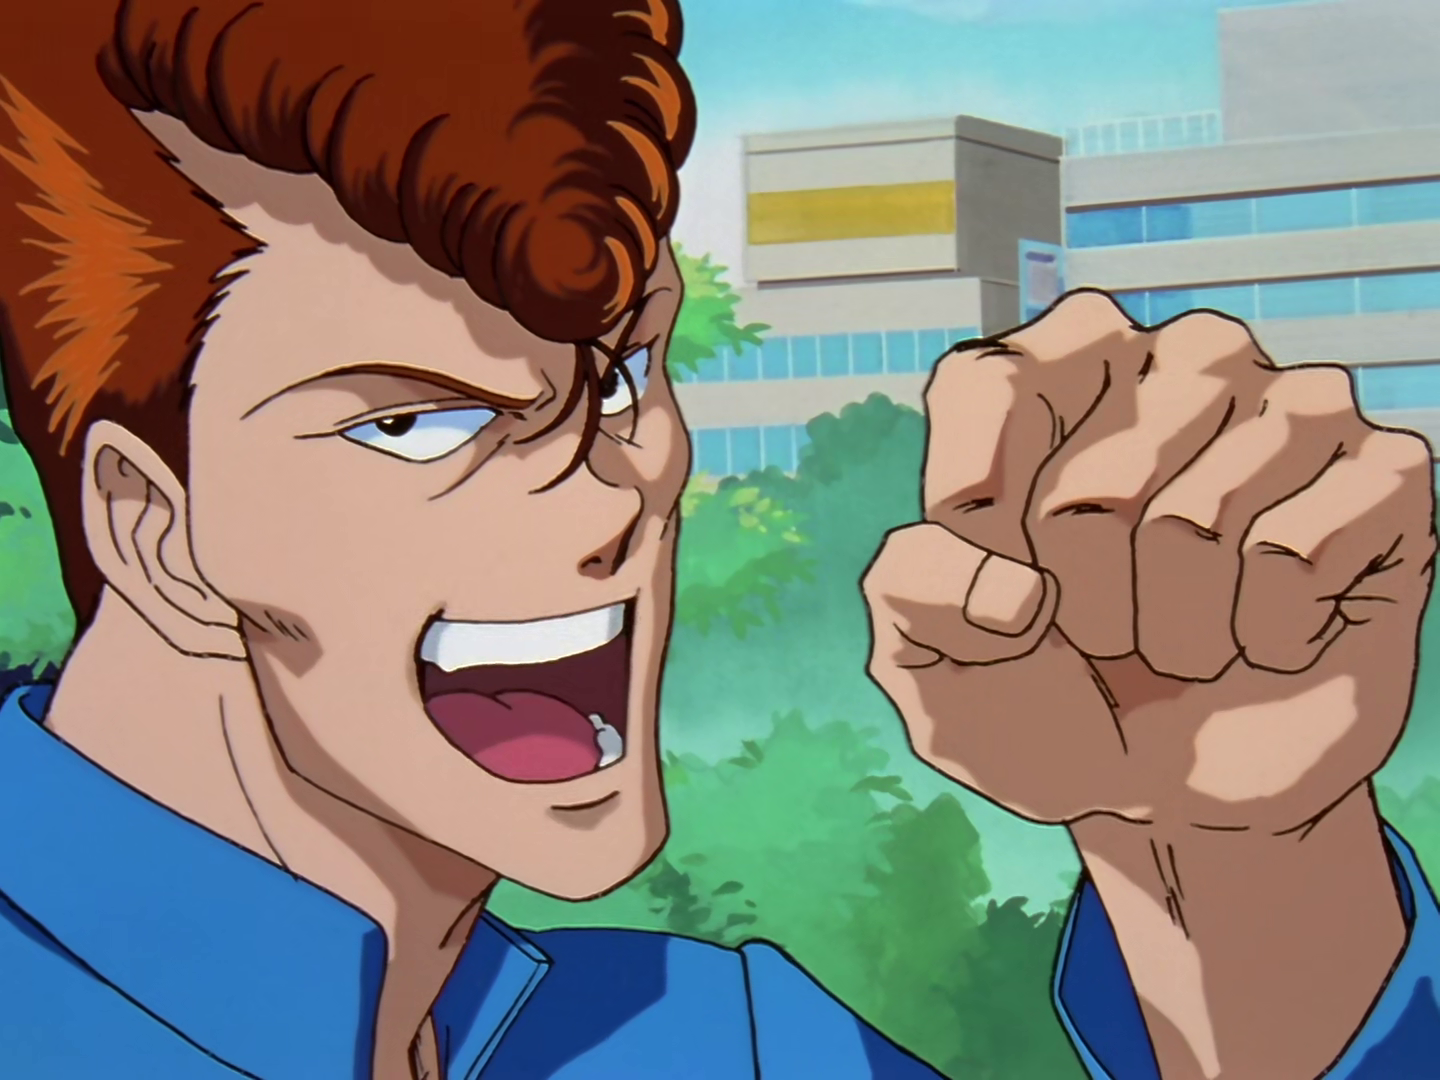 15 Super Tough Anime Characters Who Aren't Afraid of a Fight